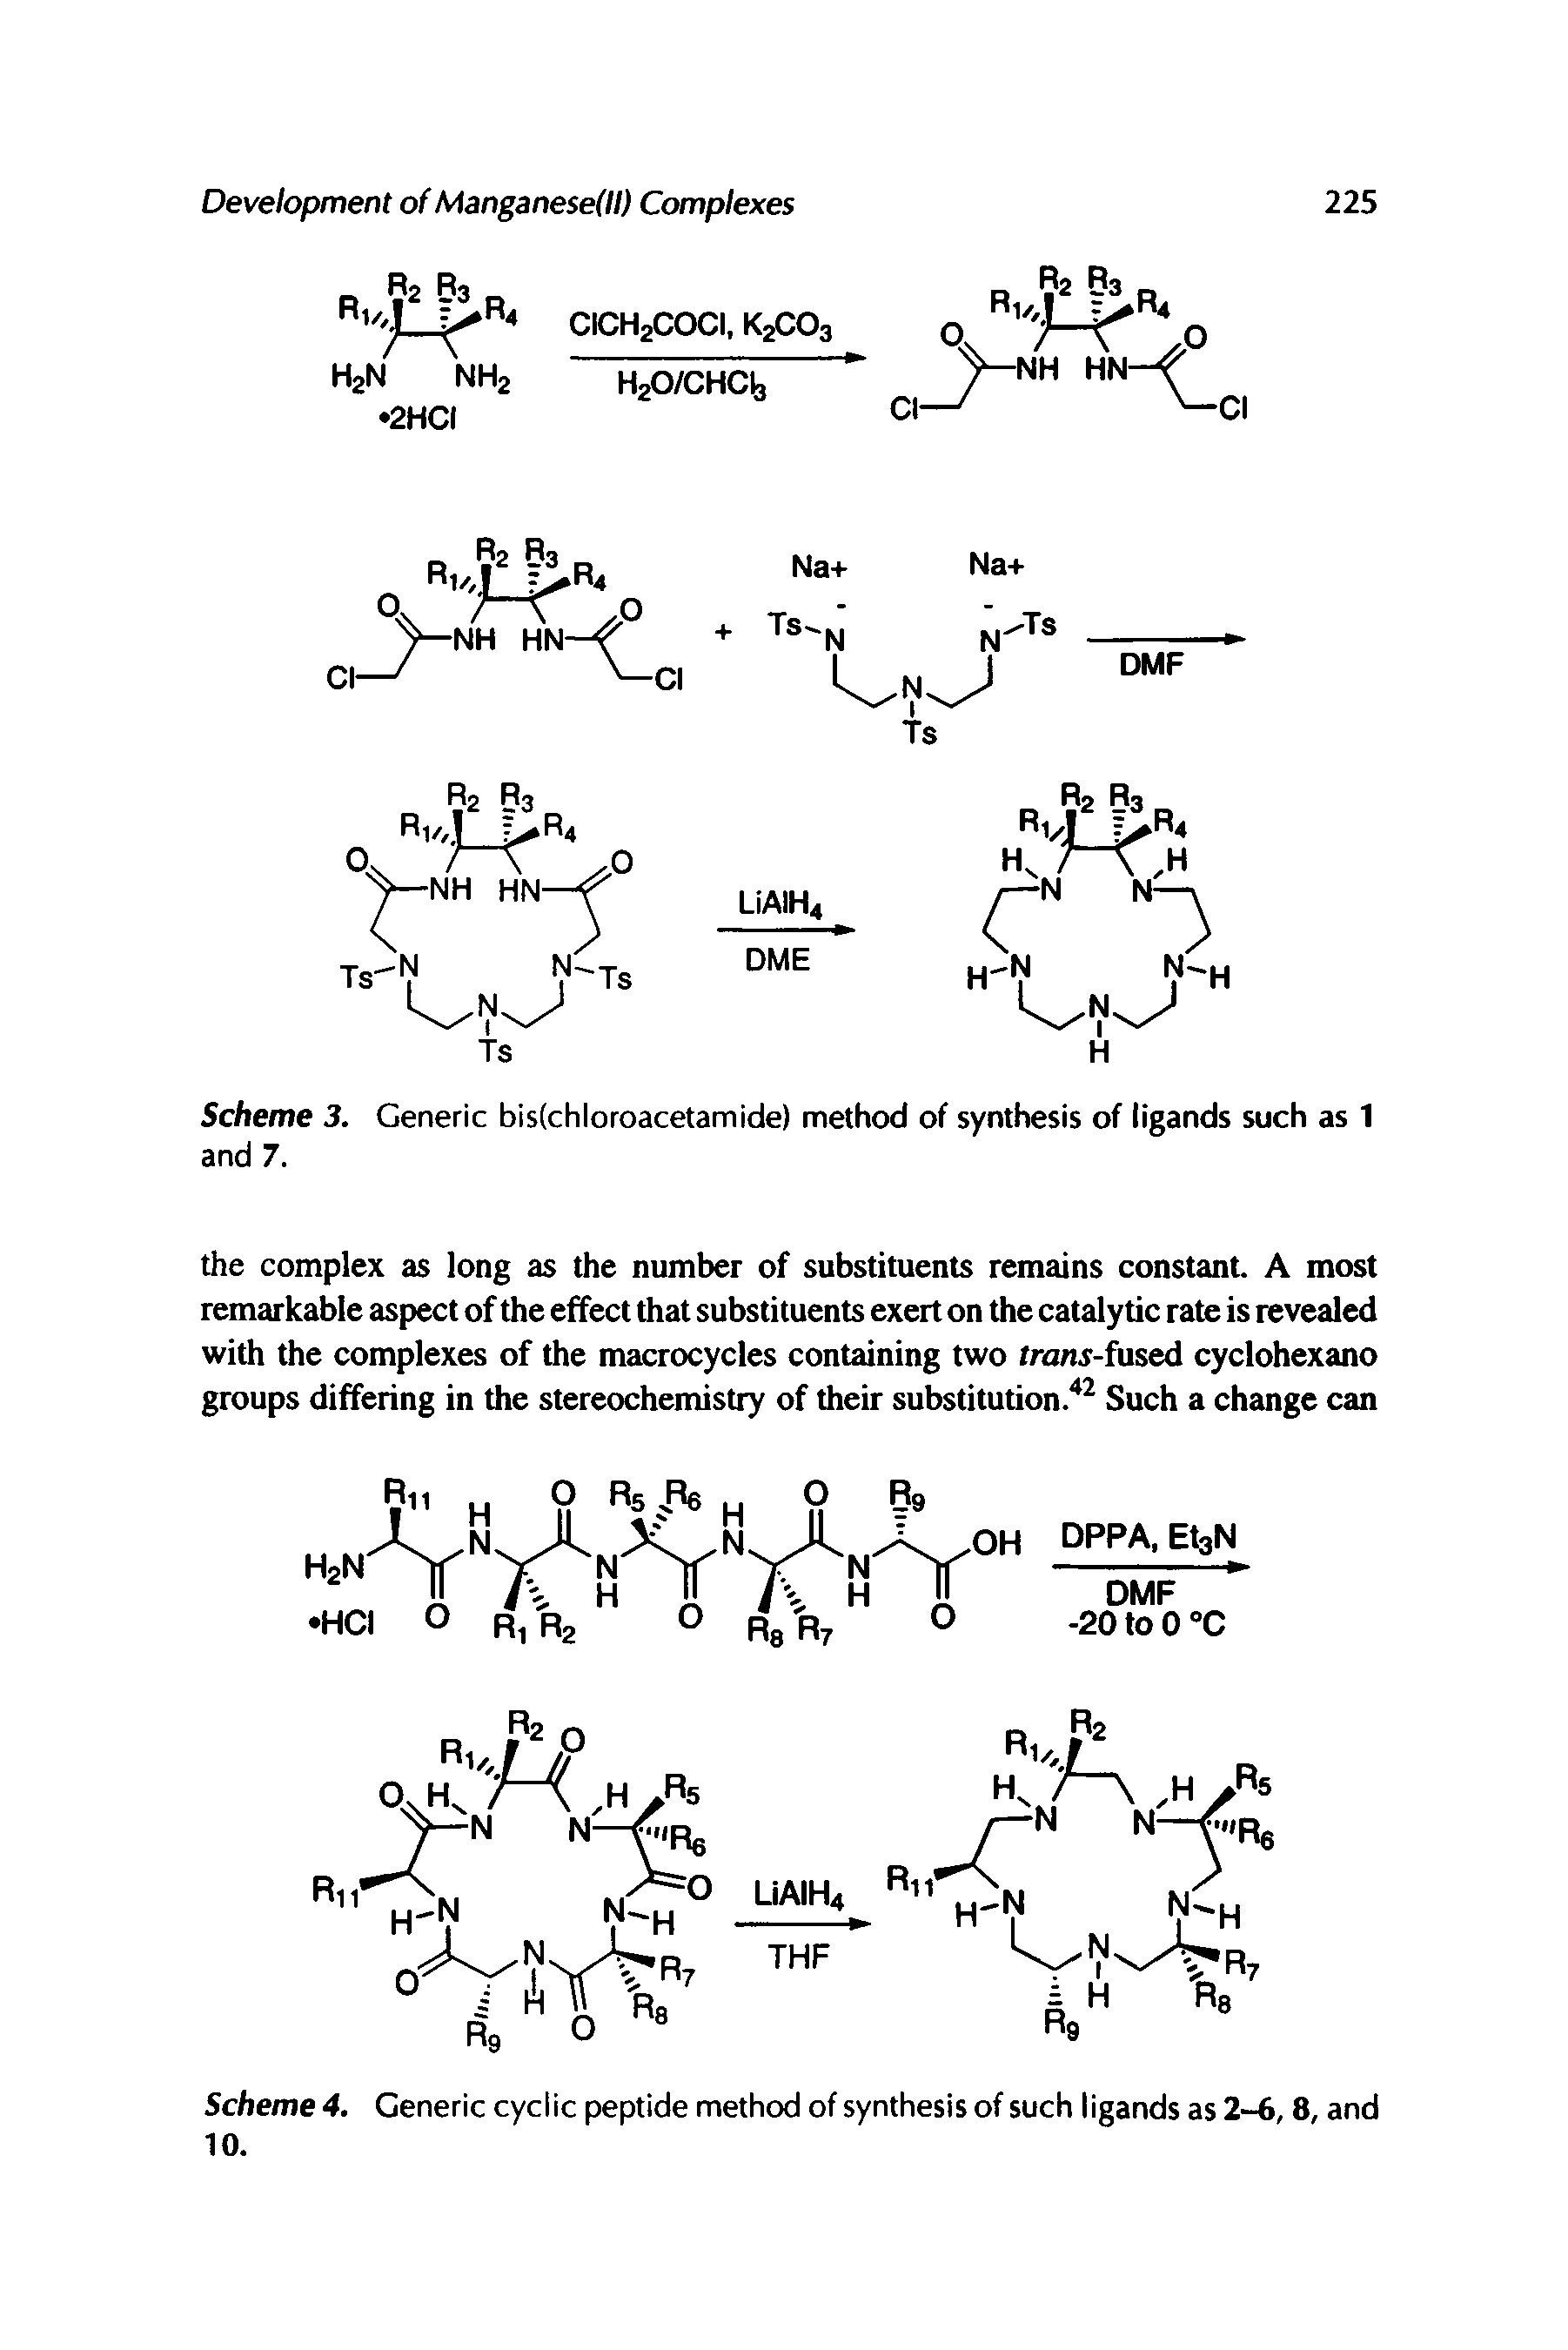 Scheme 4. Generic cyclic peptide method of synthesis of such ligands as 2-6,8, and...